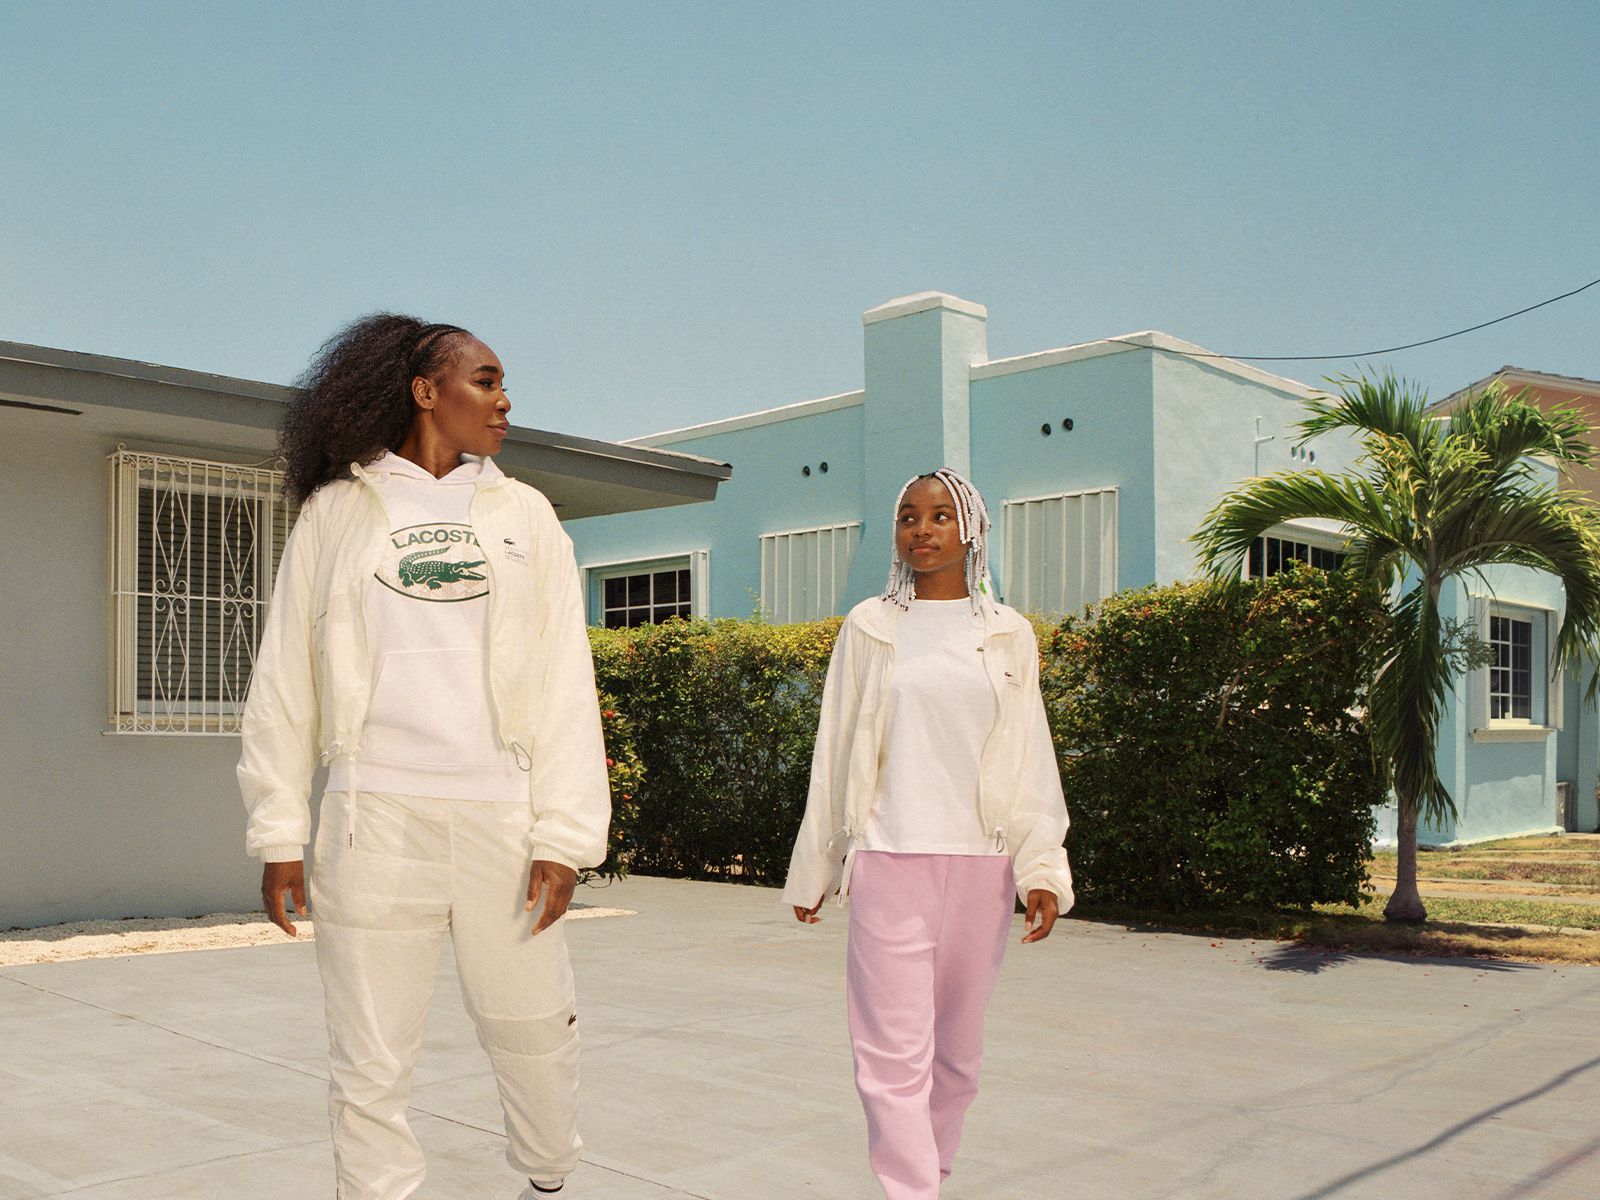 Lacoste’s next unexpected meeting is with Venus Williams